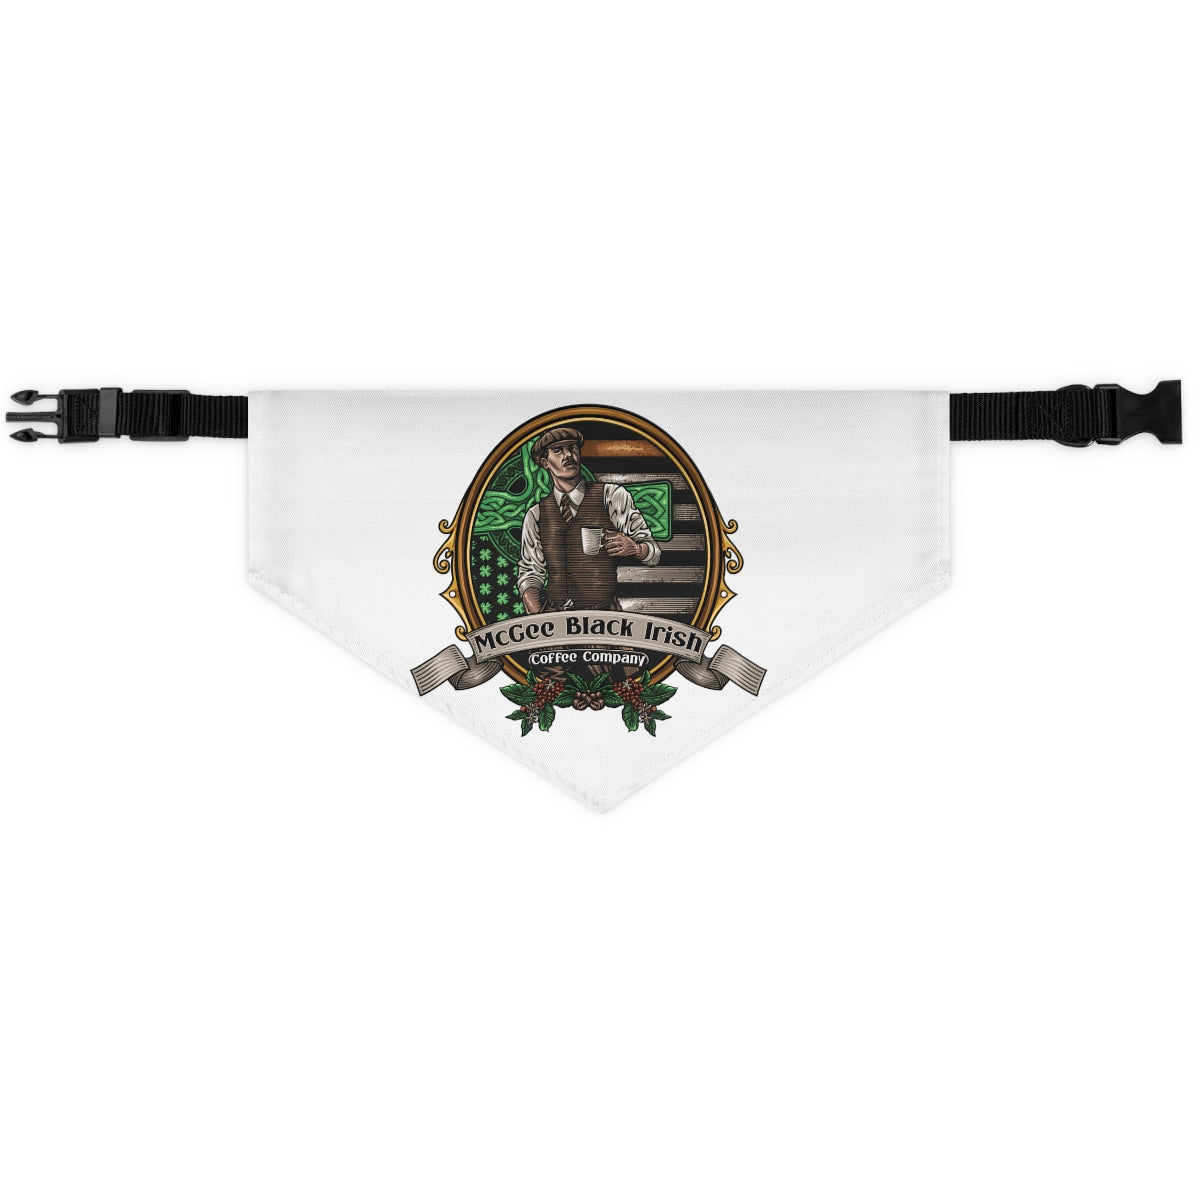 Who's The Coolest Dog at The Park?  Presenting The McGee Black Irish Coffee Pet Bandana Collar